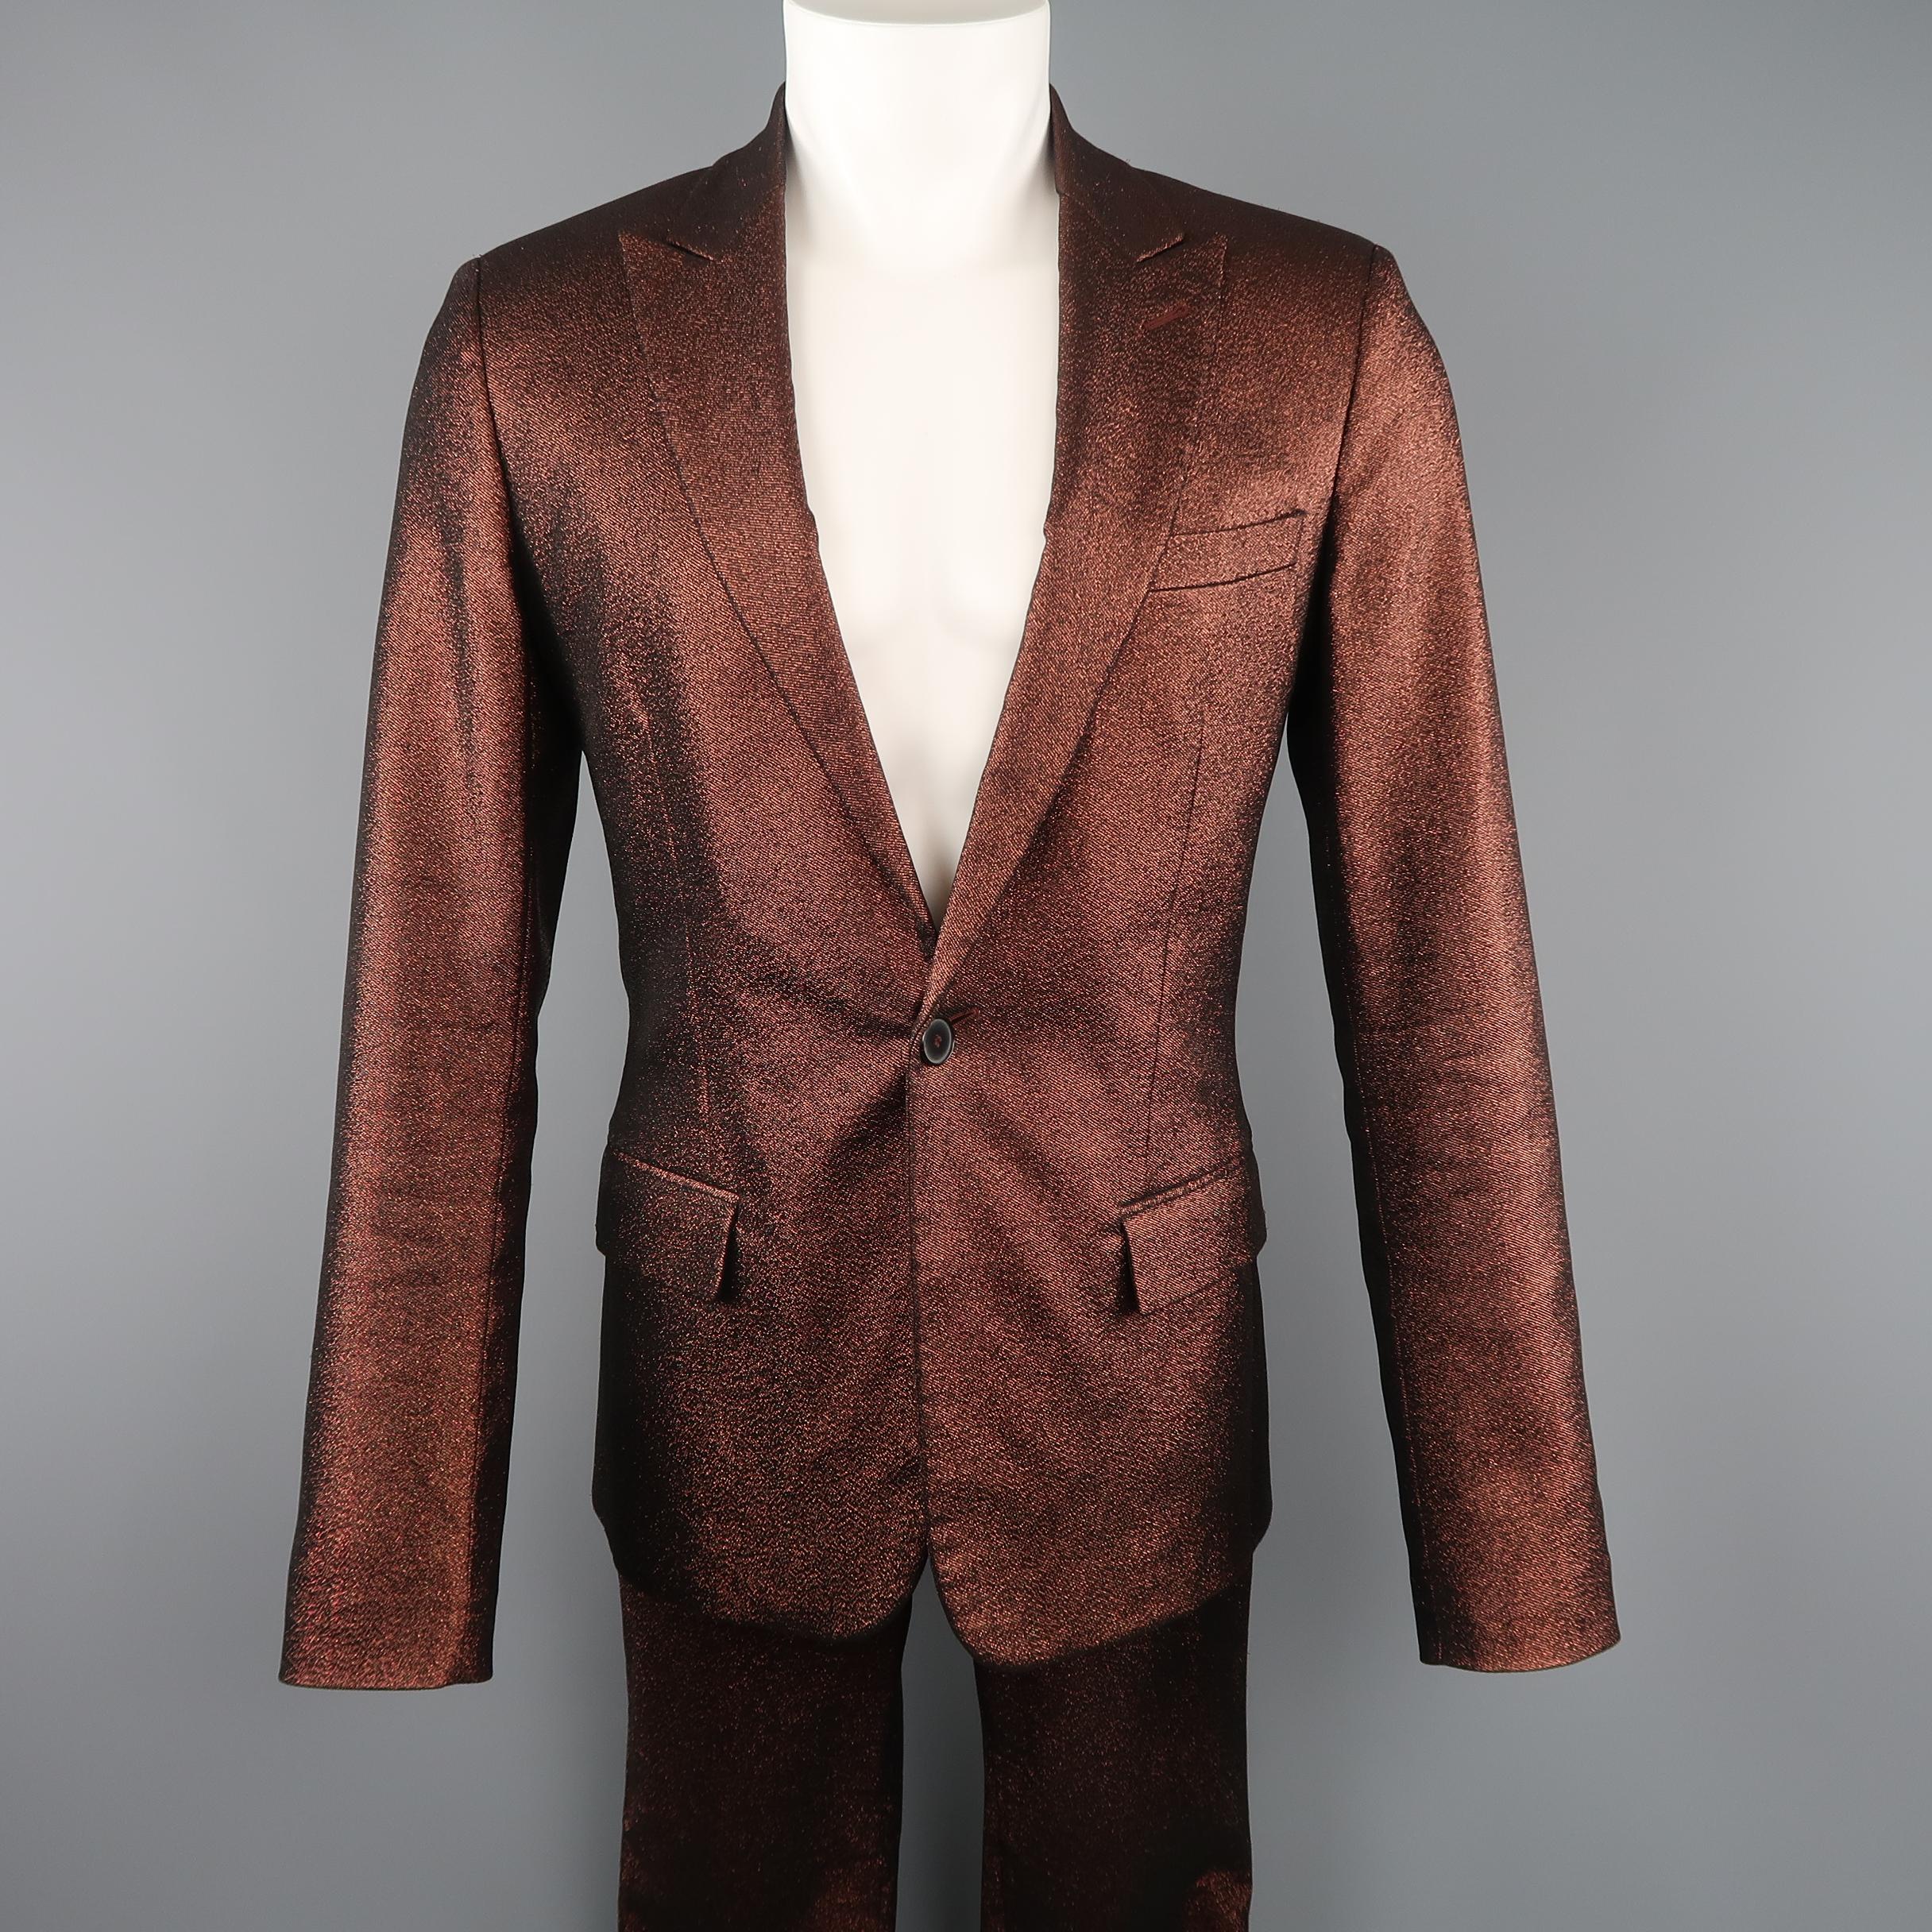 Vintage GAULTIER 2 by JEAN PAUL GAULTIER suit comes in a copper metallic sparkle fabric and includes a single breasted, peak lapel, one button slim tailored sport coat and matching skinny trousers. Made in Italy.
 
Excellent Pre-Owned